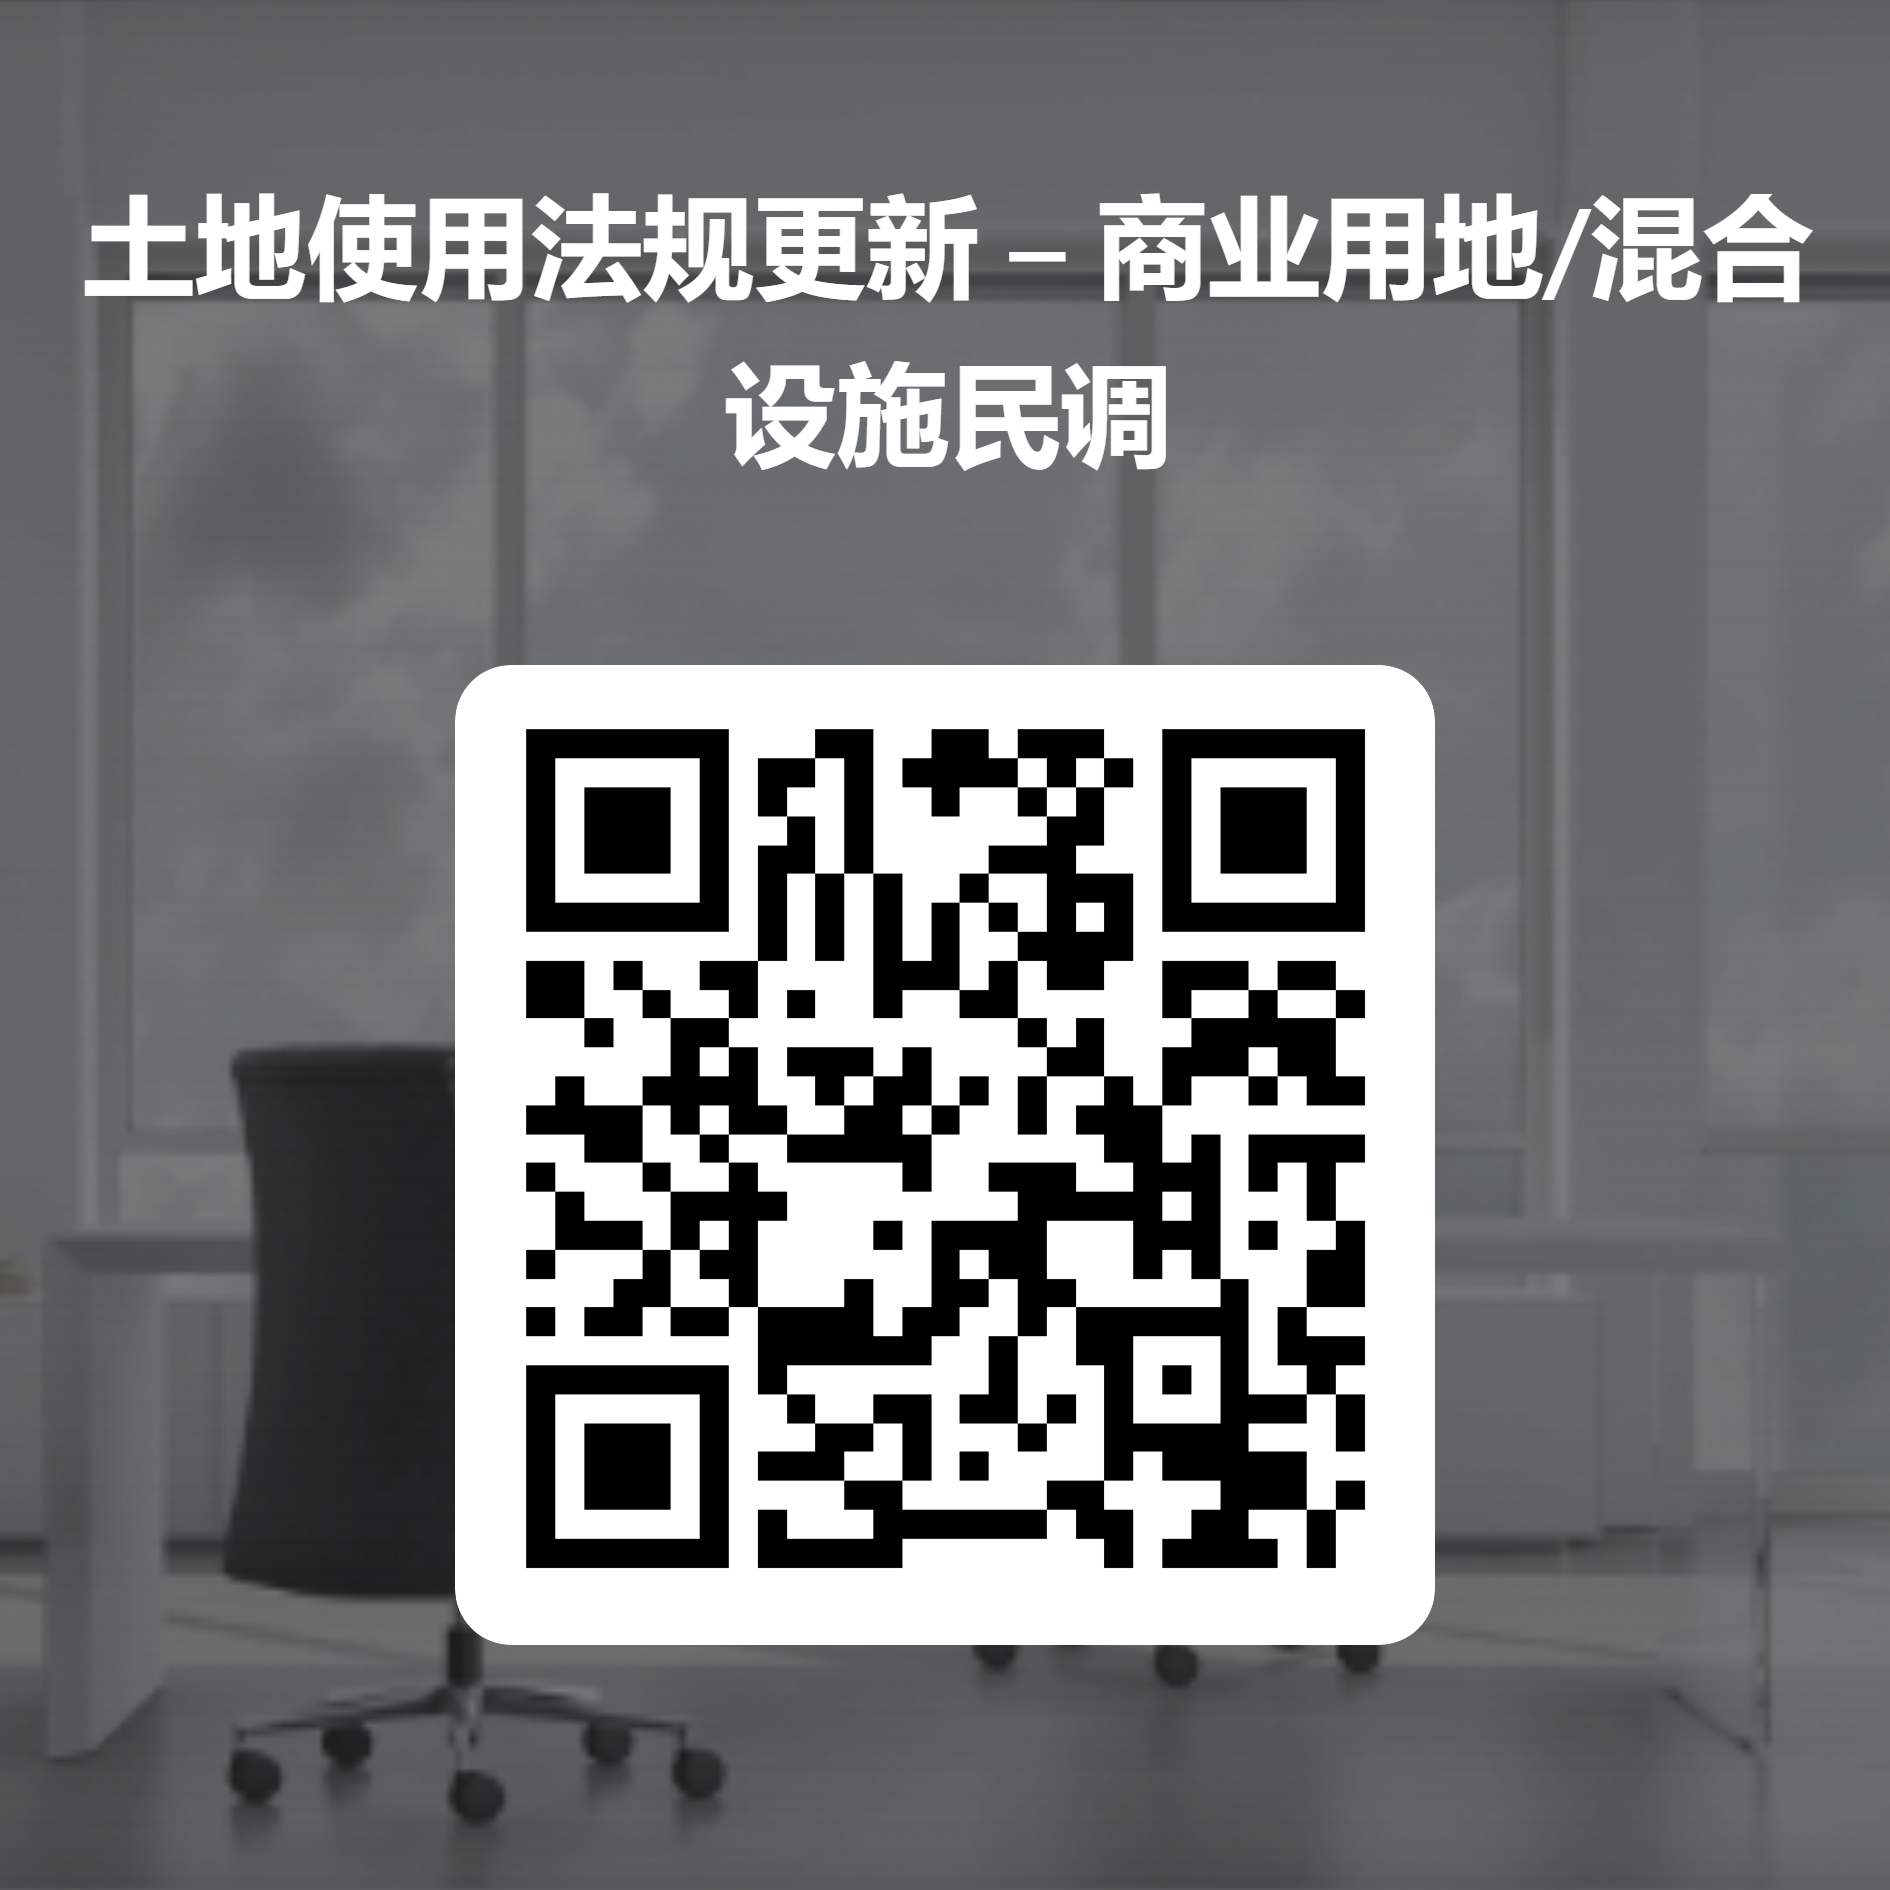 QR Code for Survey in Chinese